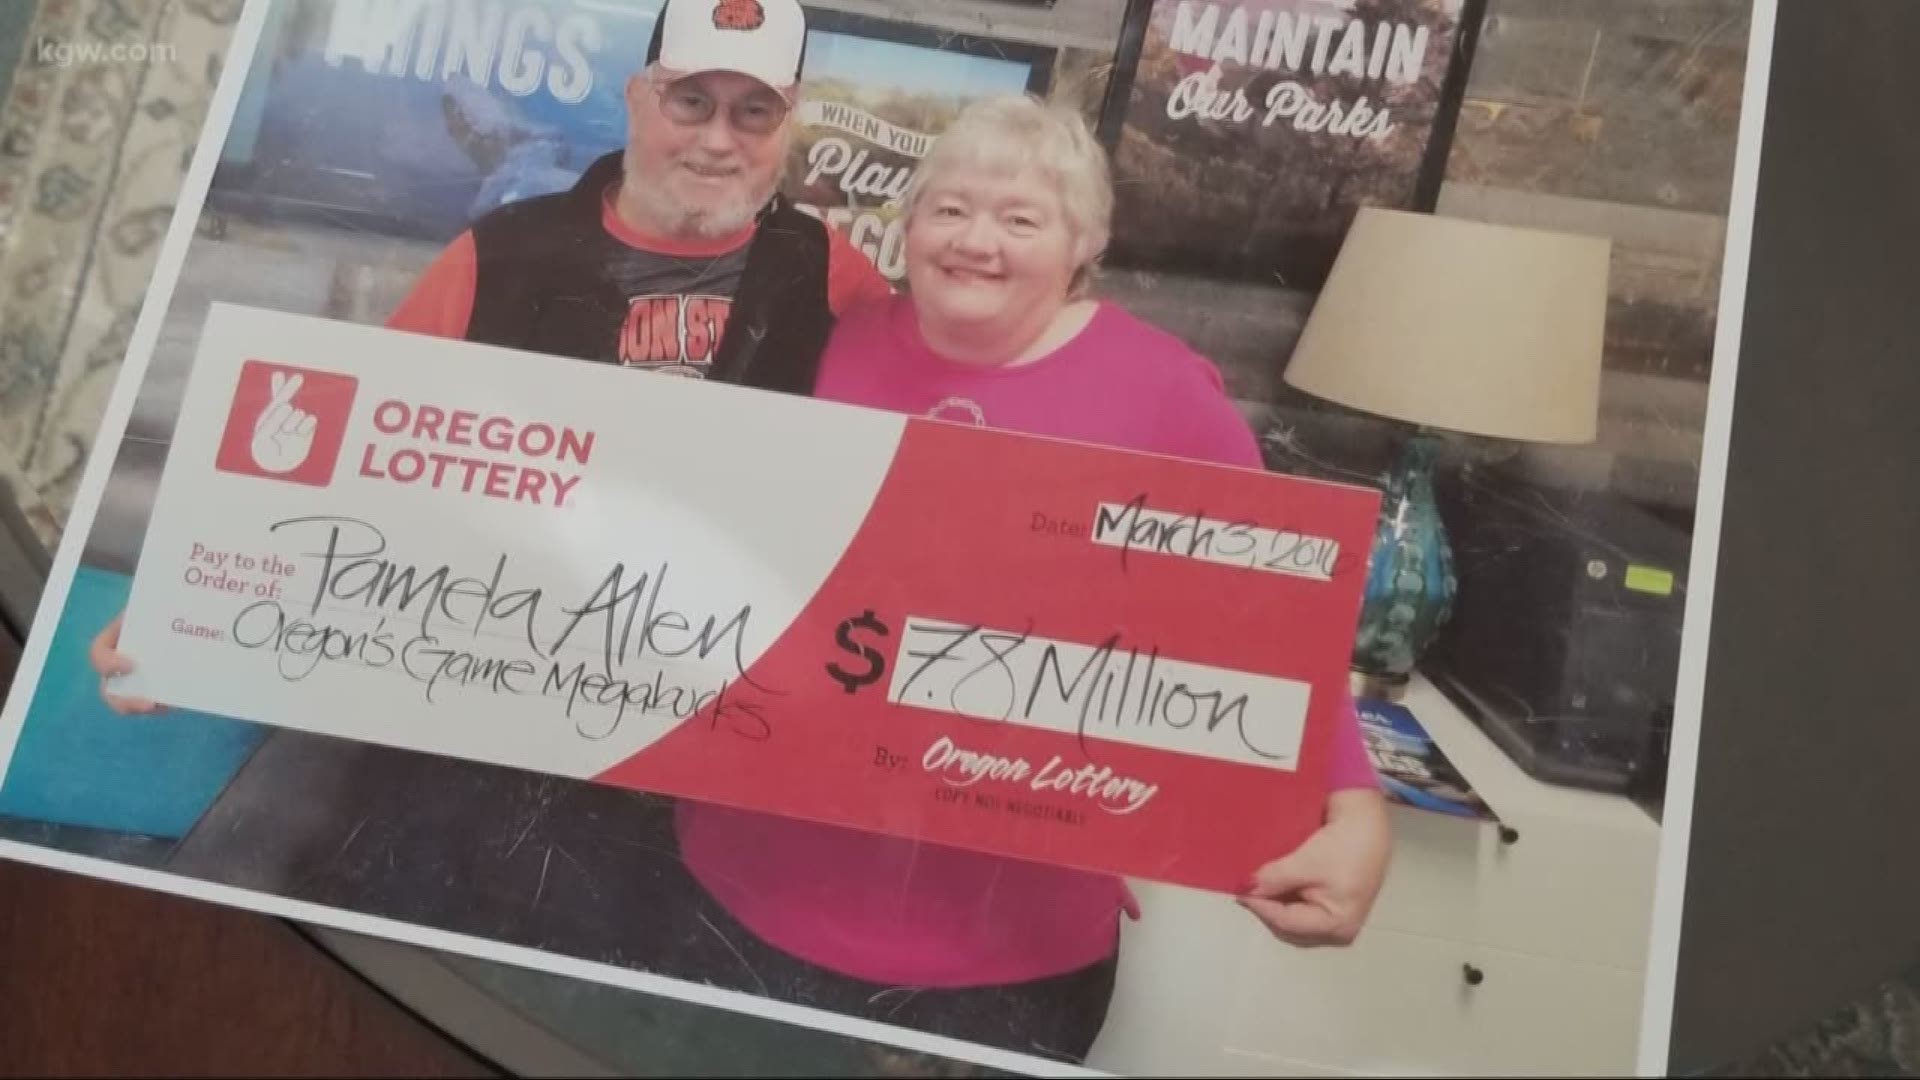 INSTANT MILLIONAIRE: We asked 149 millionaires how they spent the jackpot |  kgw.com